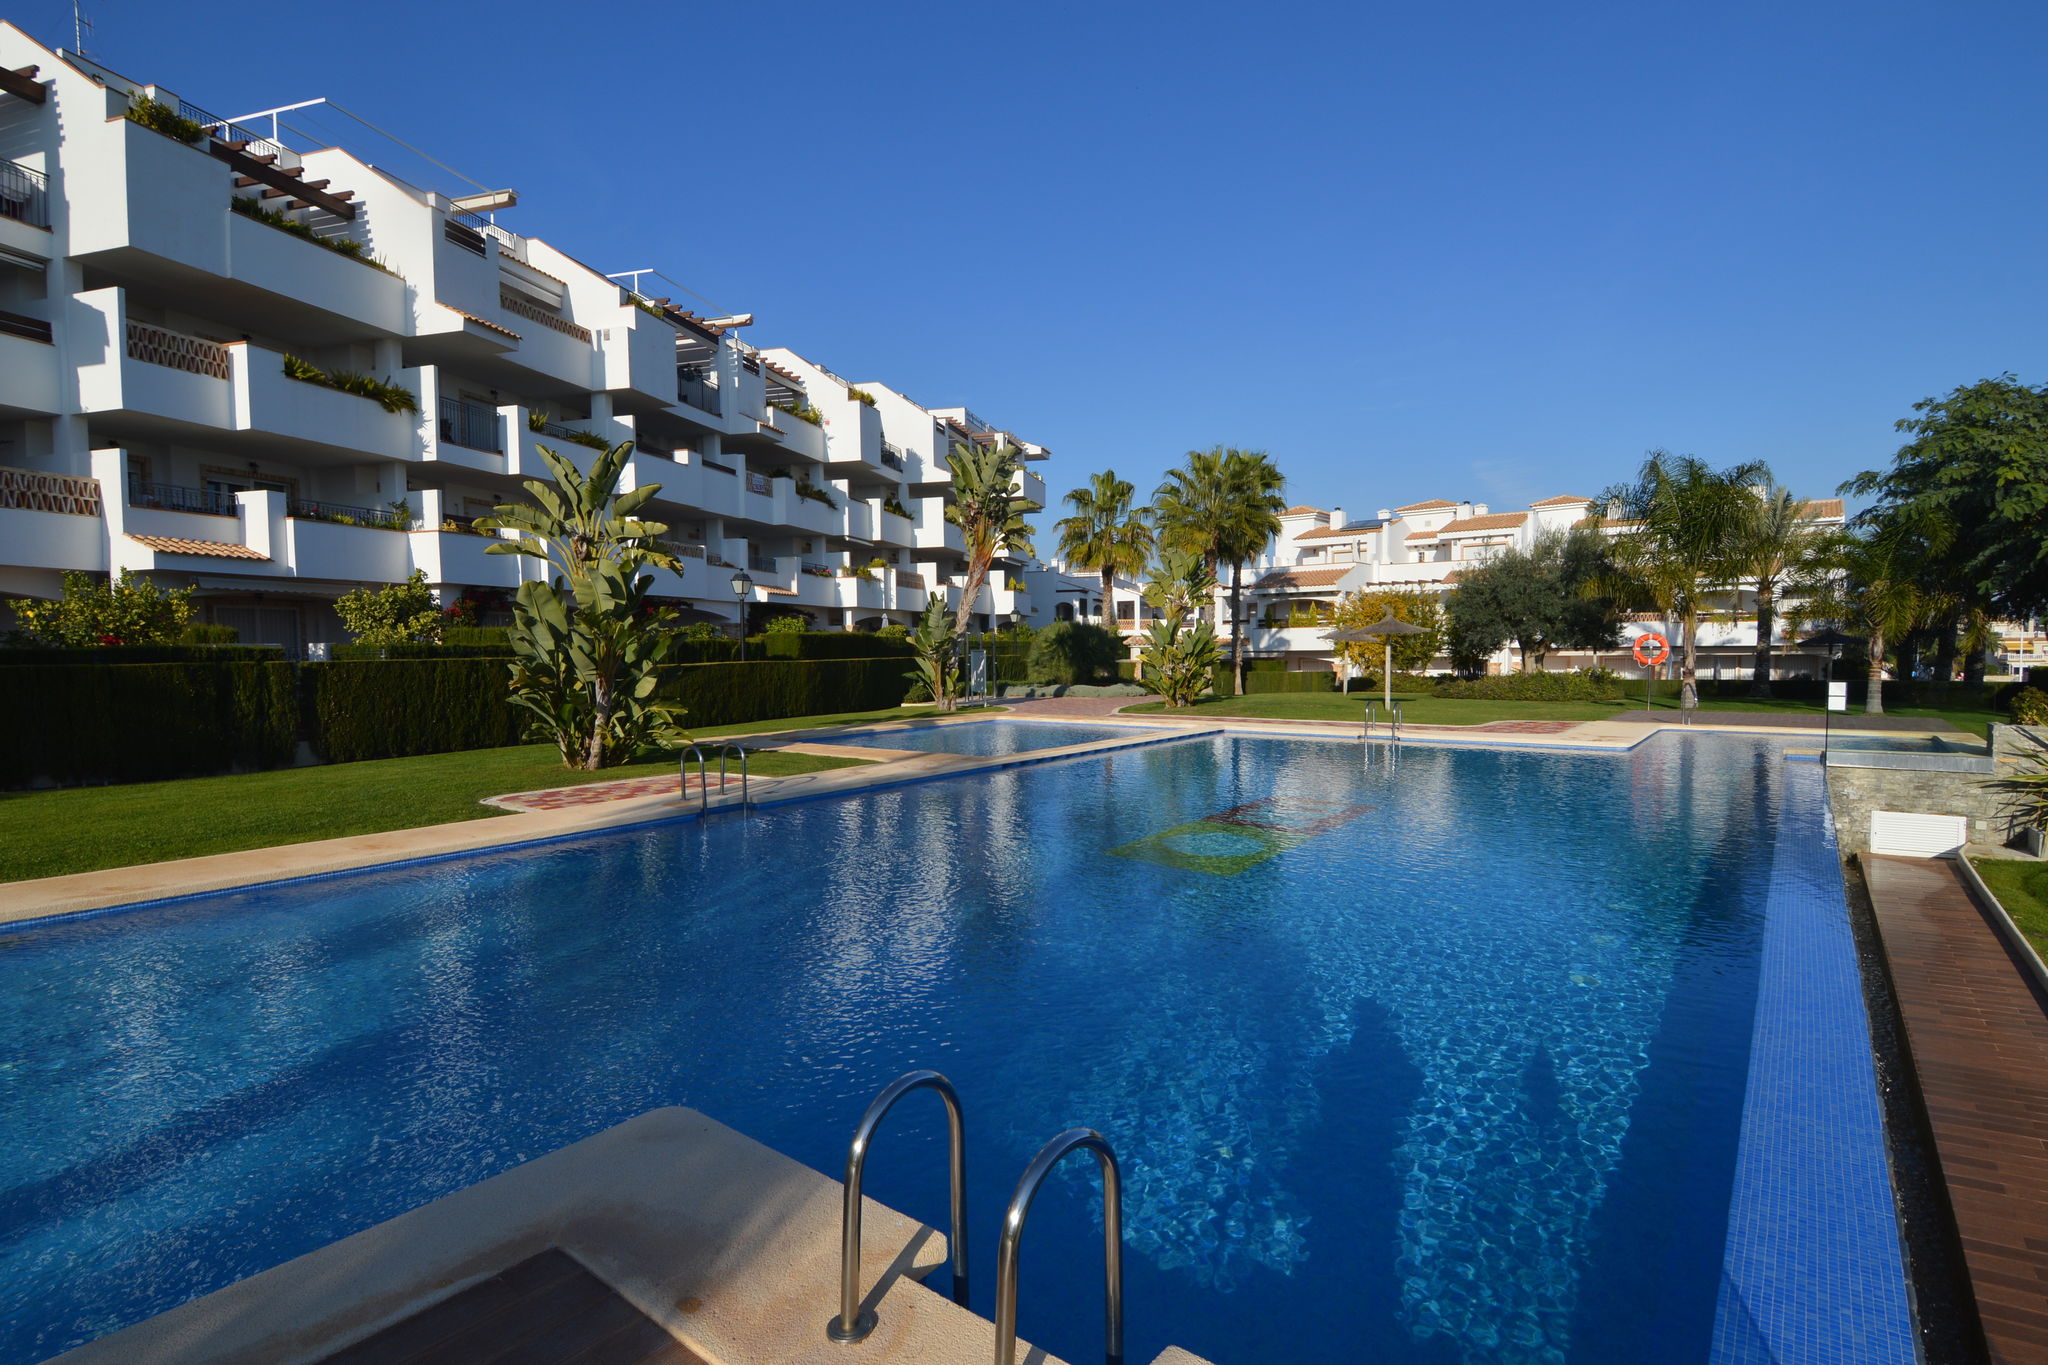 Modernes Appartement mit Swimmingpool am Meer in Valencia